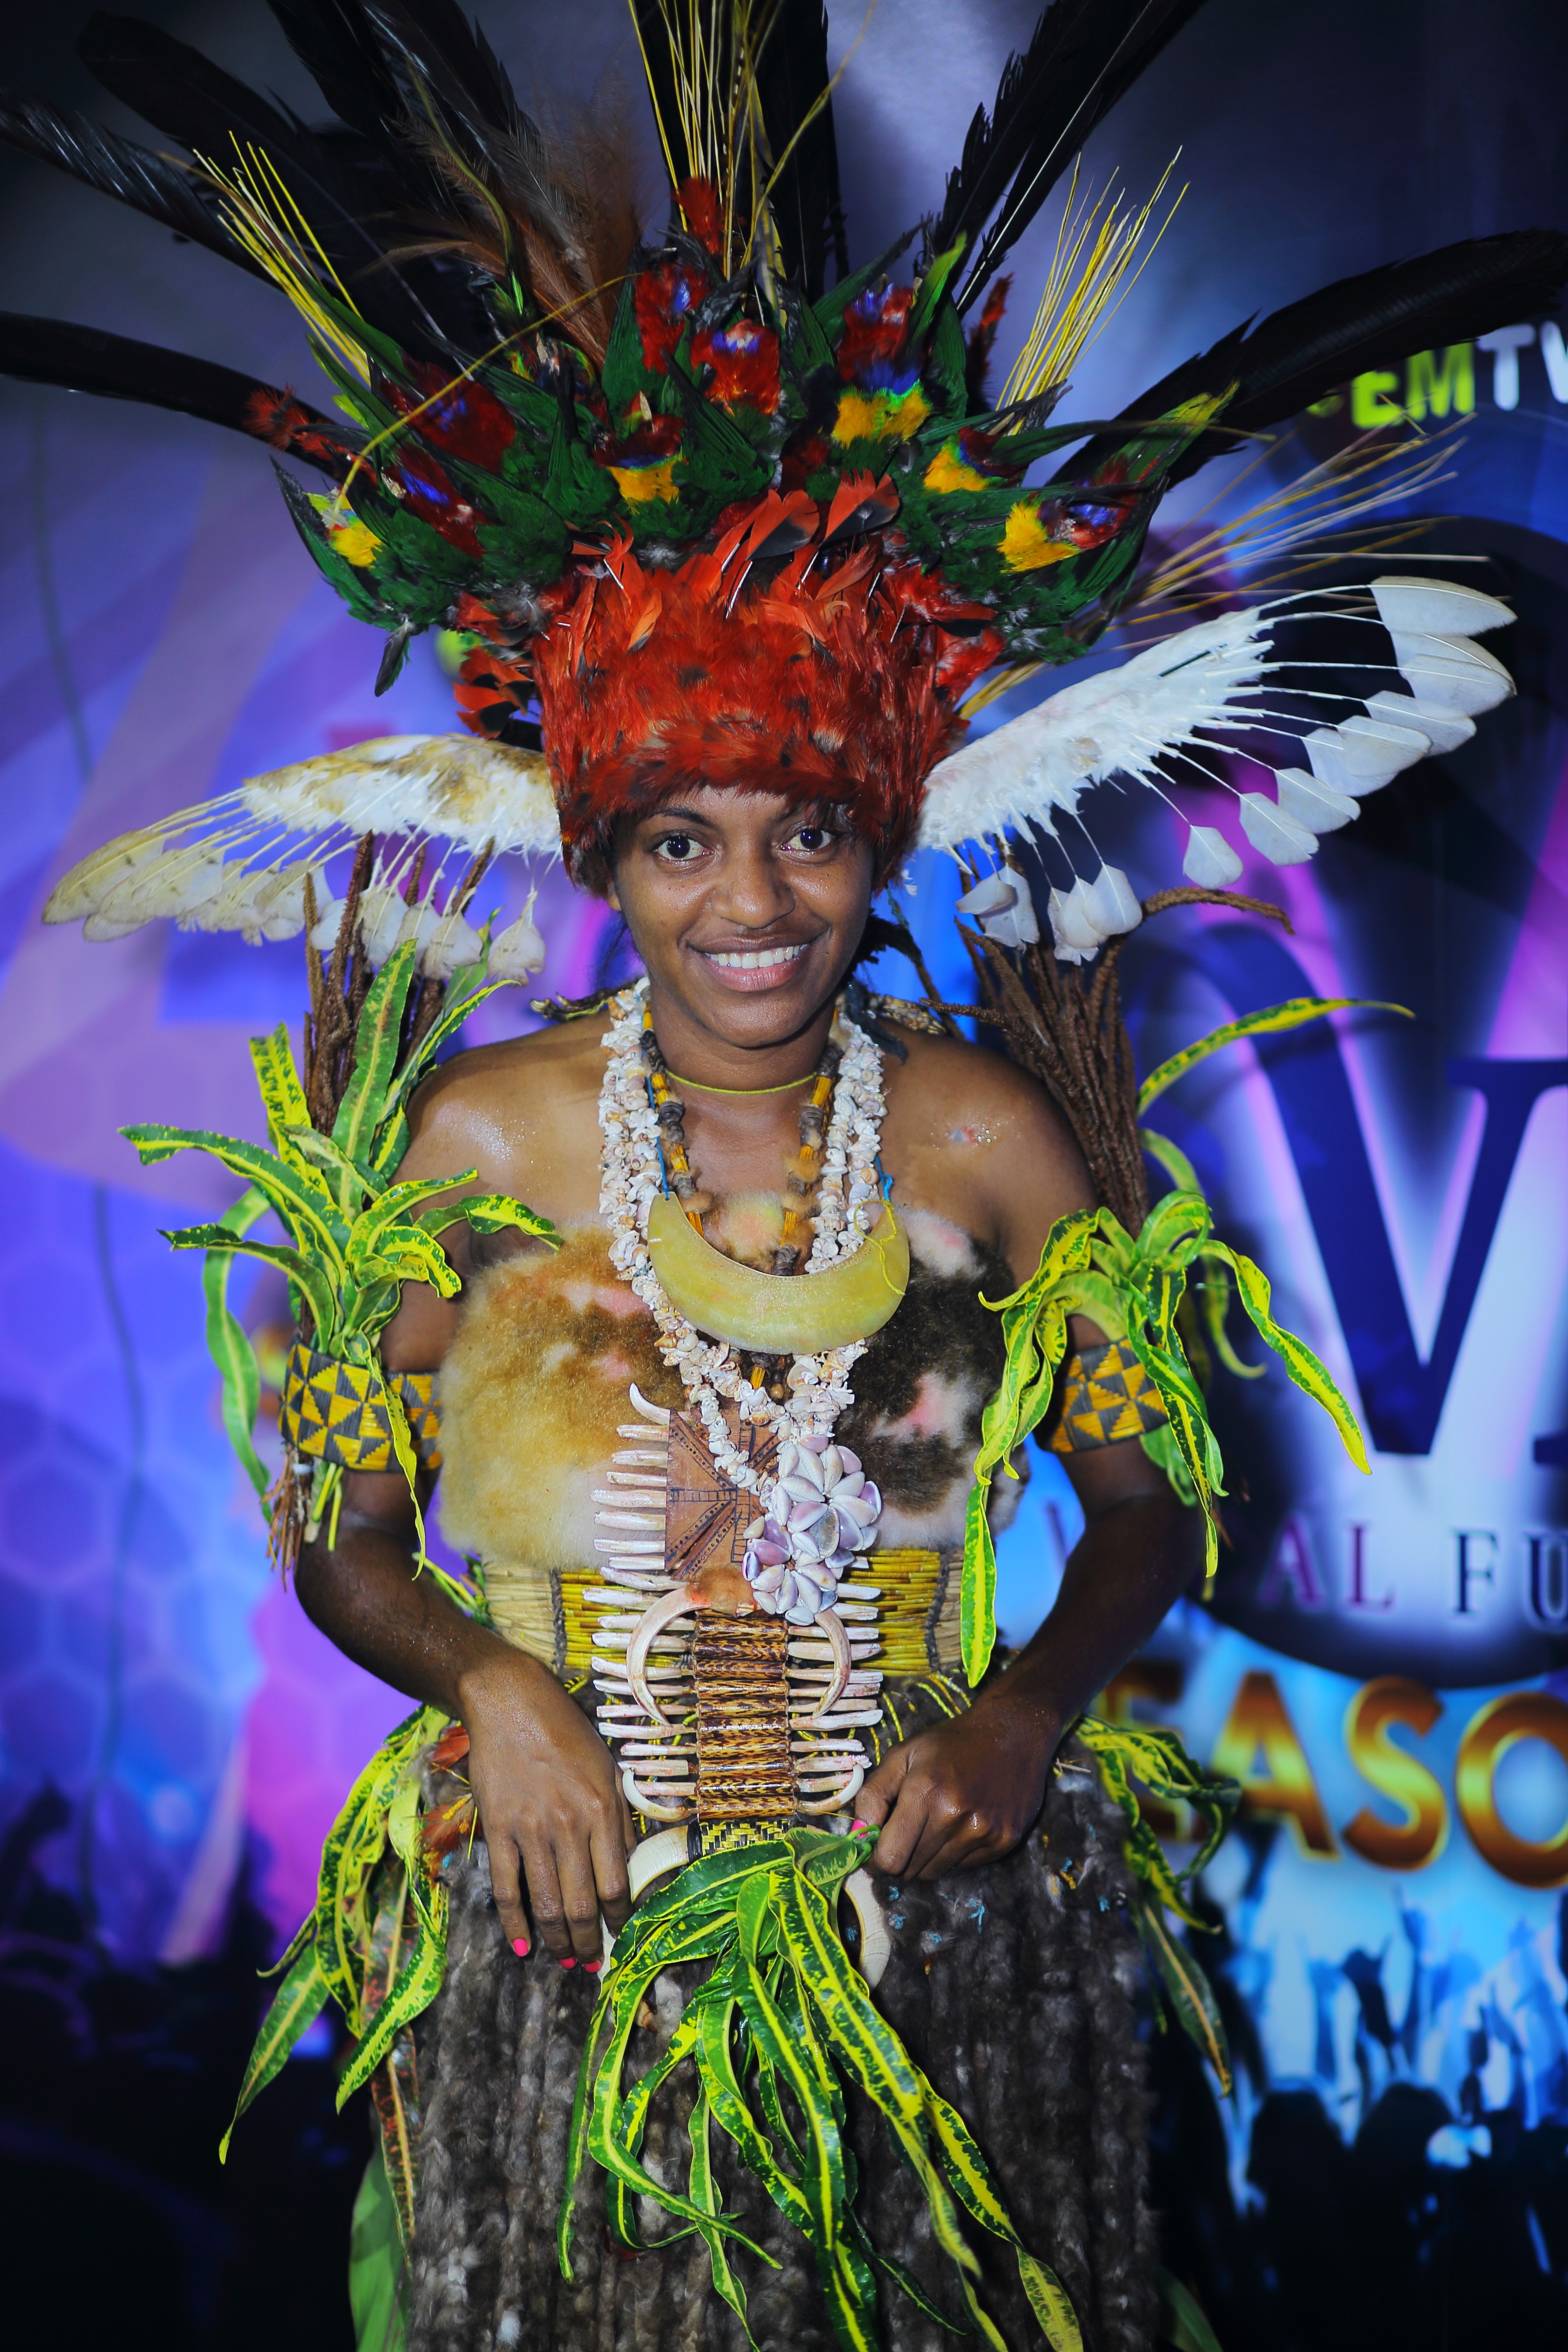 Jacklyn Joseph is from a mix parentage of Morobe and Simbu, and loves listening to RnB music. She attends Port Moresby National High and is in Year 12. The 20 year old's musical idol is her big brother 'Kronos'.